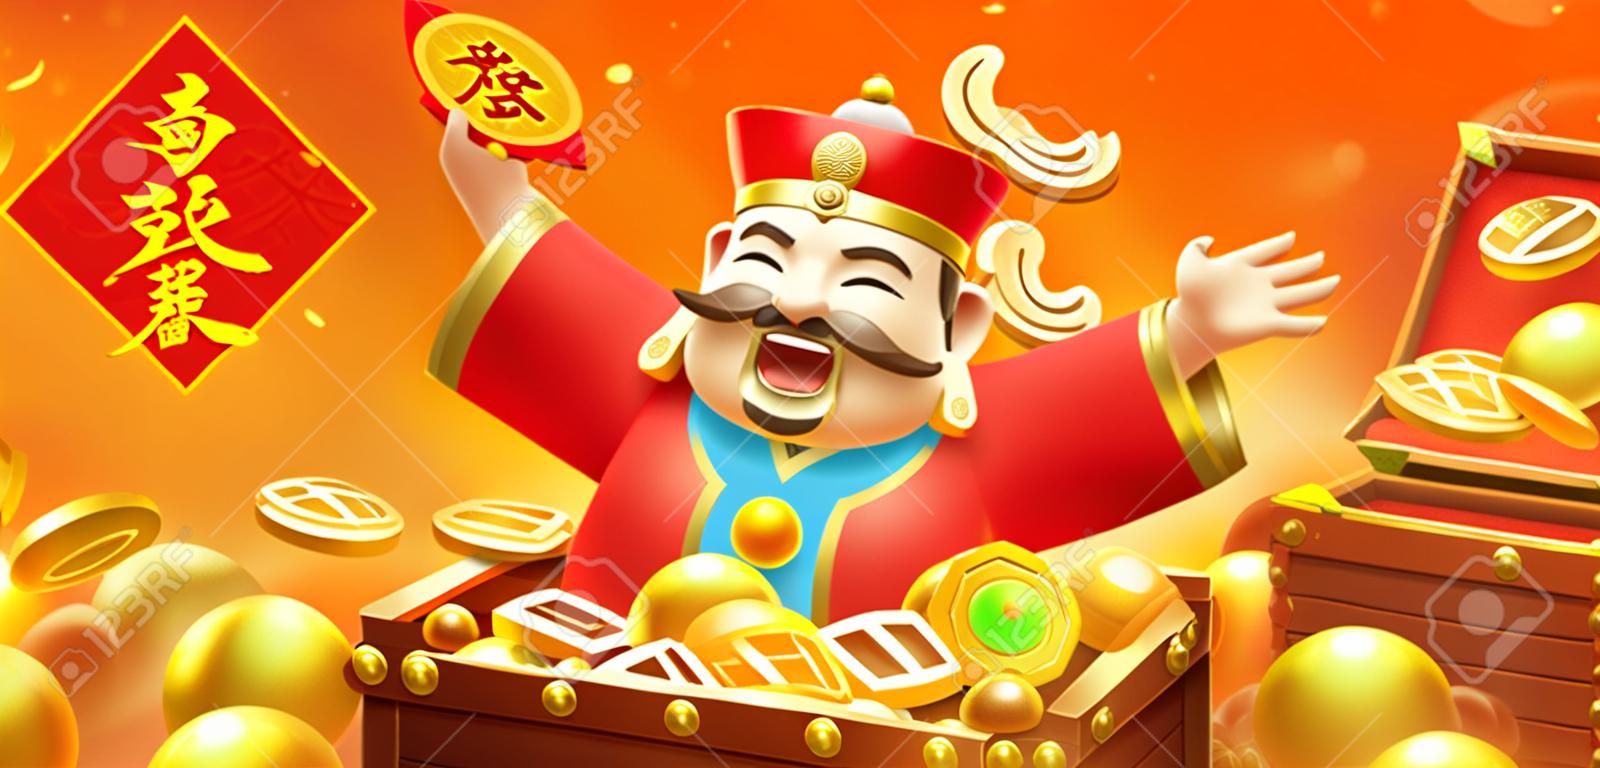 3d orange CNY banner. God of wealth coming out from wooden treasure box full of gold on orange background. Text: Wishing wealth comes to you. Welcome Caishen.